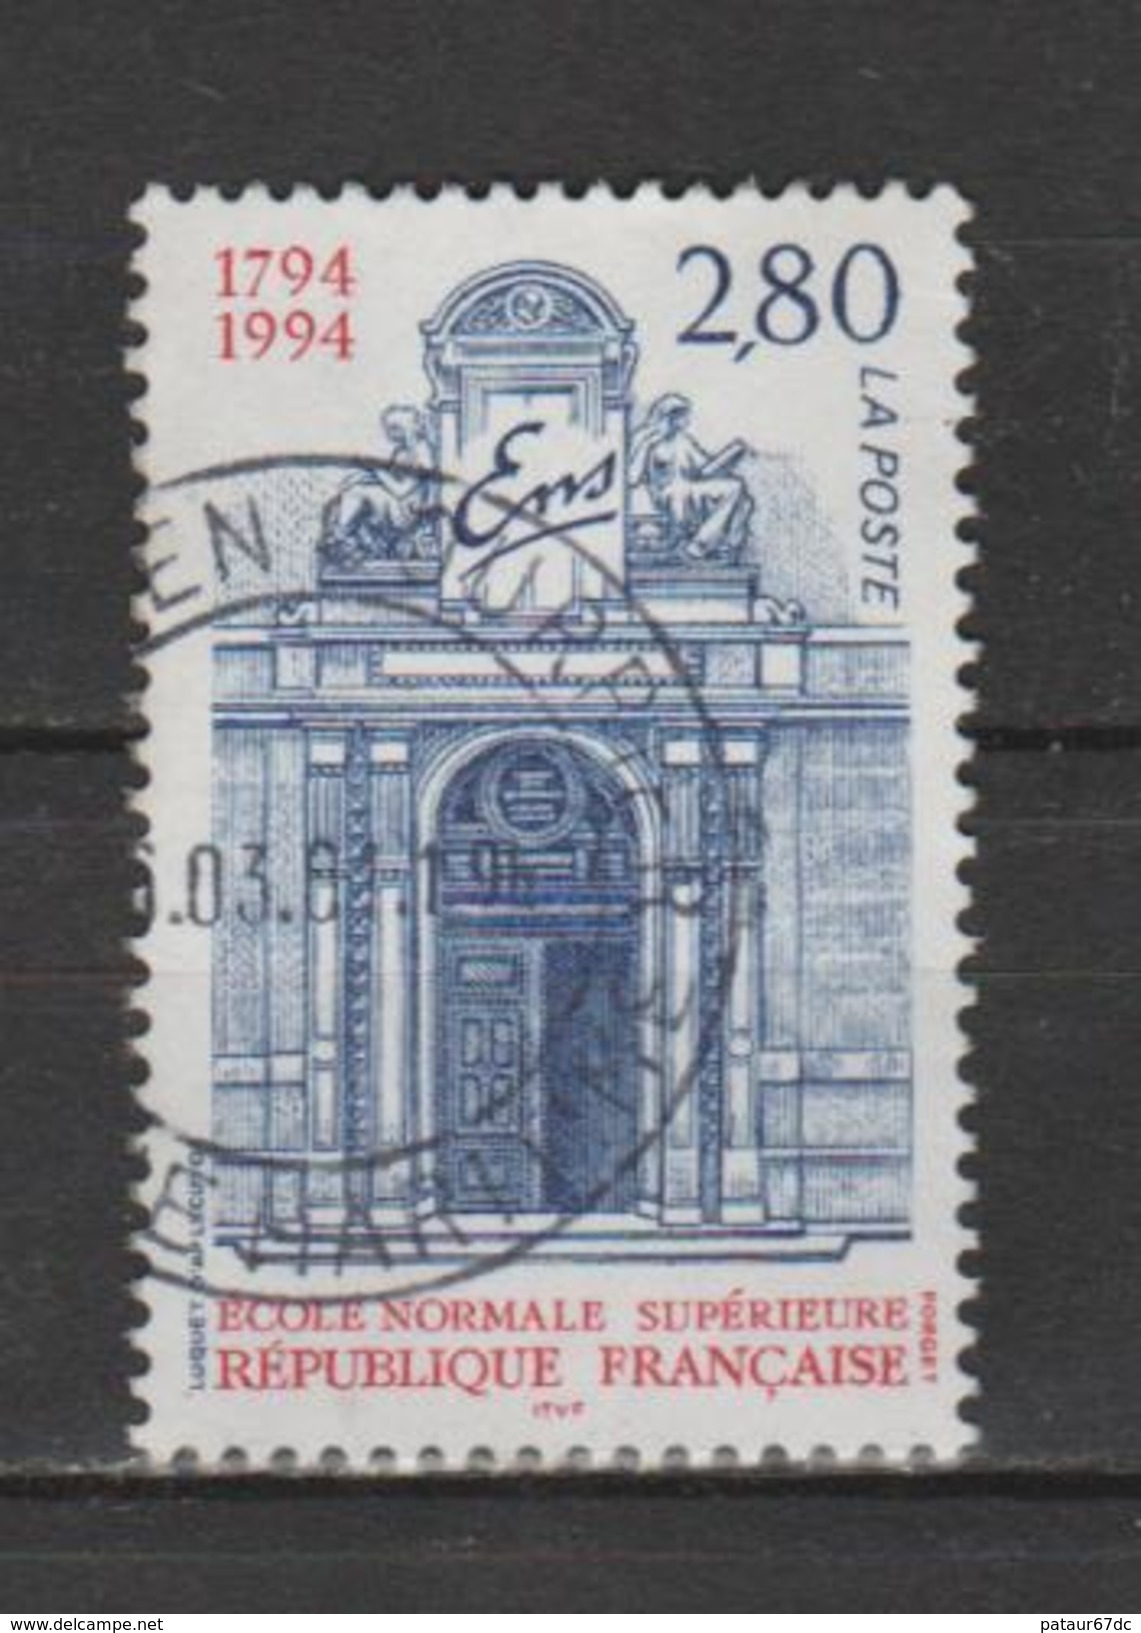 FRANCE / 1994 / Y&T N° 2907 : Ecole Normale Supérieure - Choisi - Cachet Rond - Gebraucht